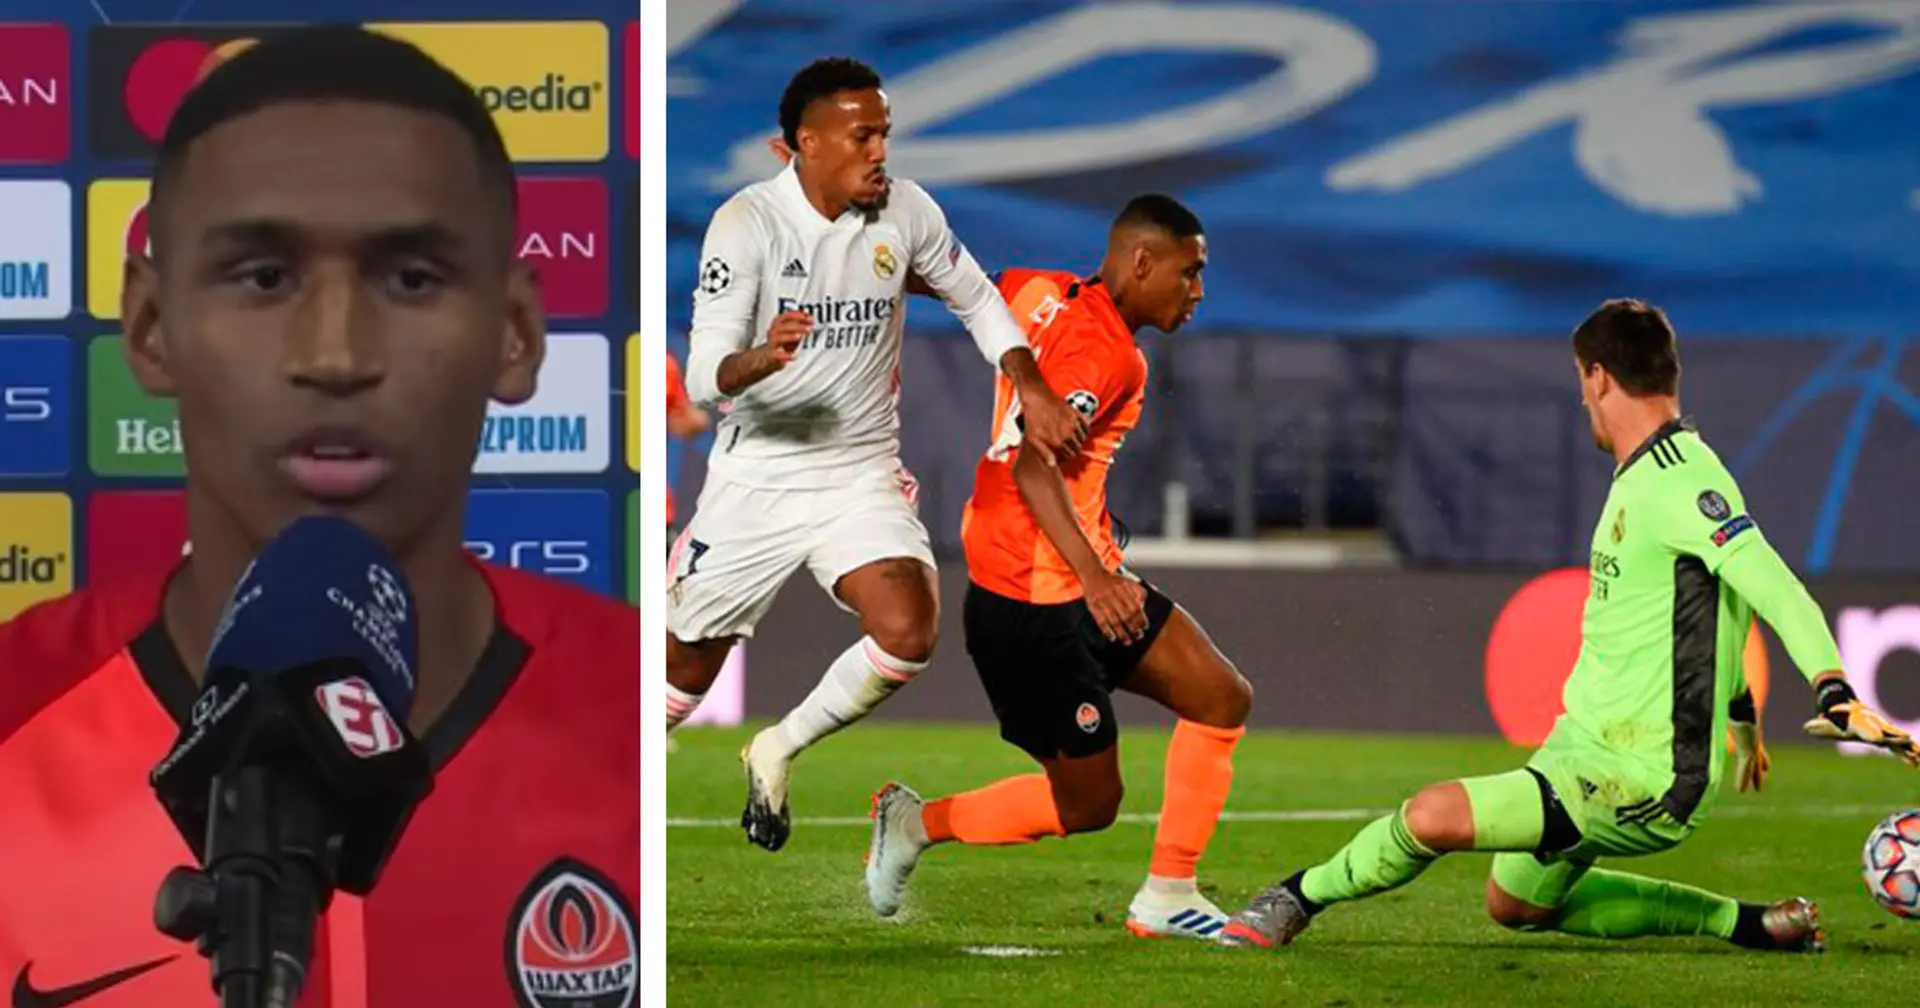 Beautiful: Shakhtar Donetsk star Tete scores vs Real Madrid in Champions League and says he has 'special feeling towards Barca'